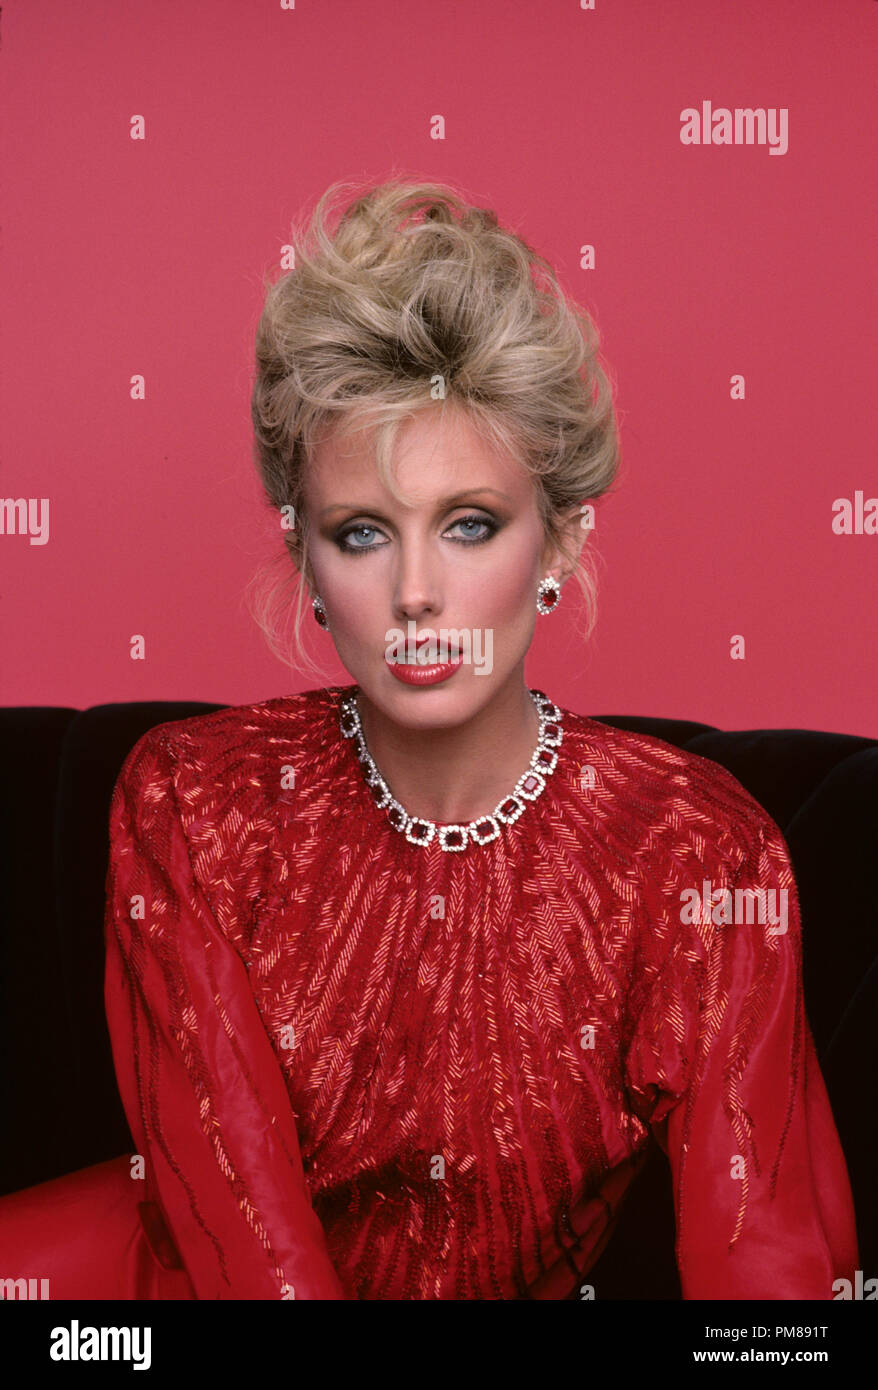 Studio Publicity Still from "Paper Dolls" Morgan Fairchild 1984 All Rights  Reserved File Reference # 31706249THA For Editorial Use Only Stock Photo -  Alamy